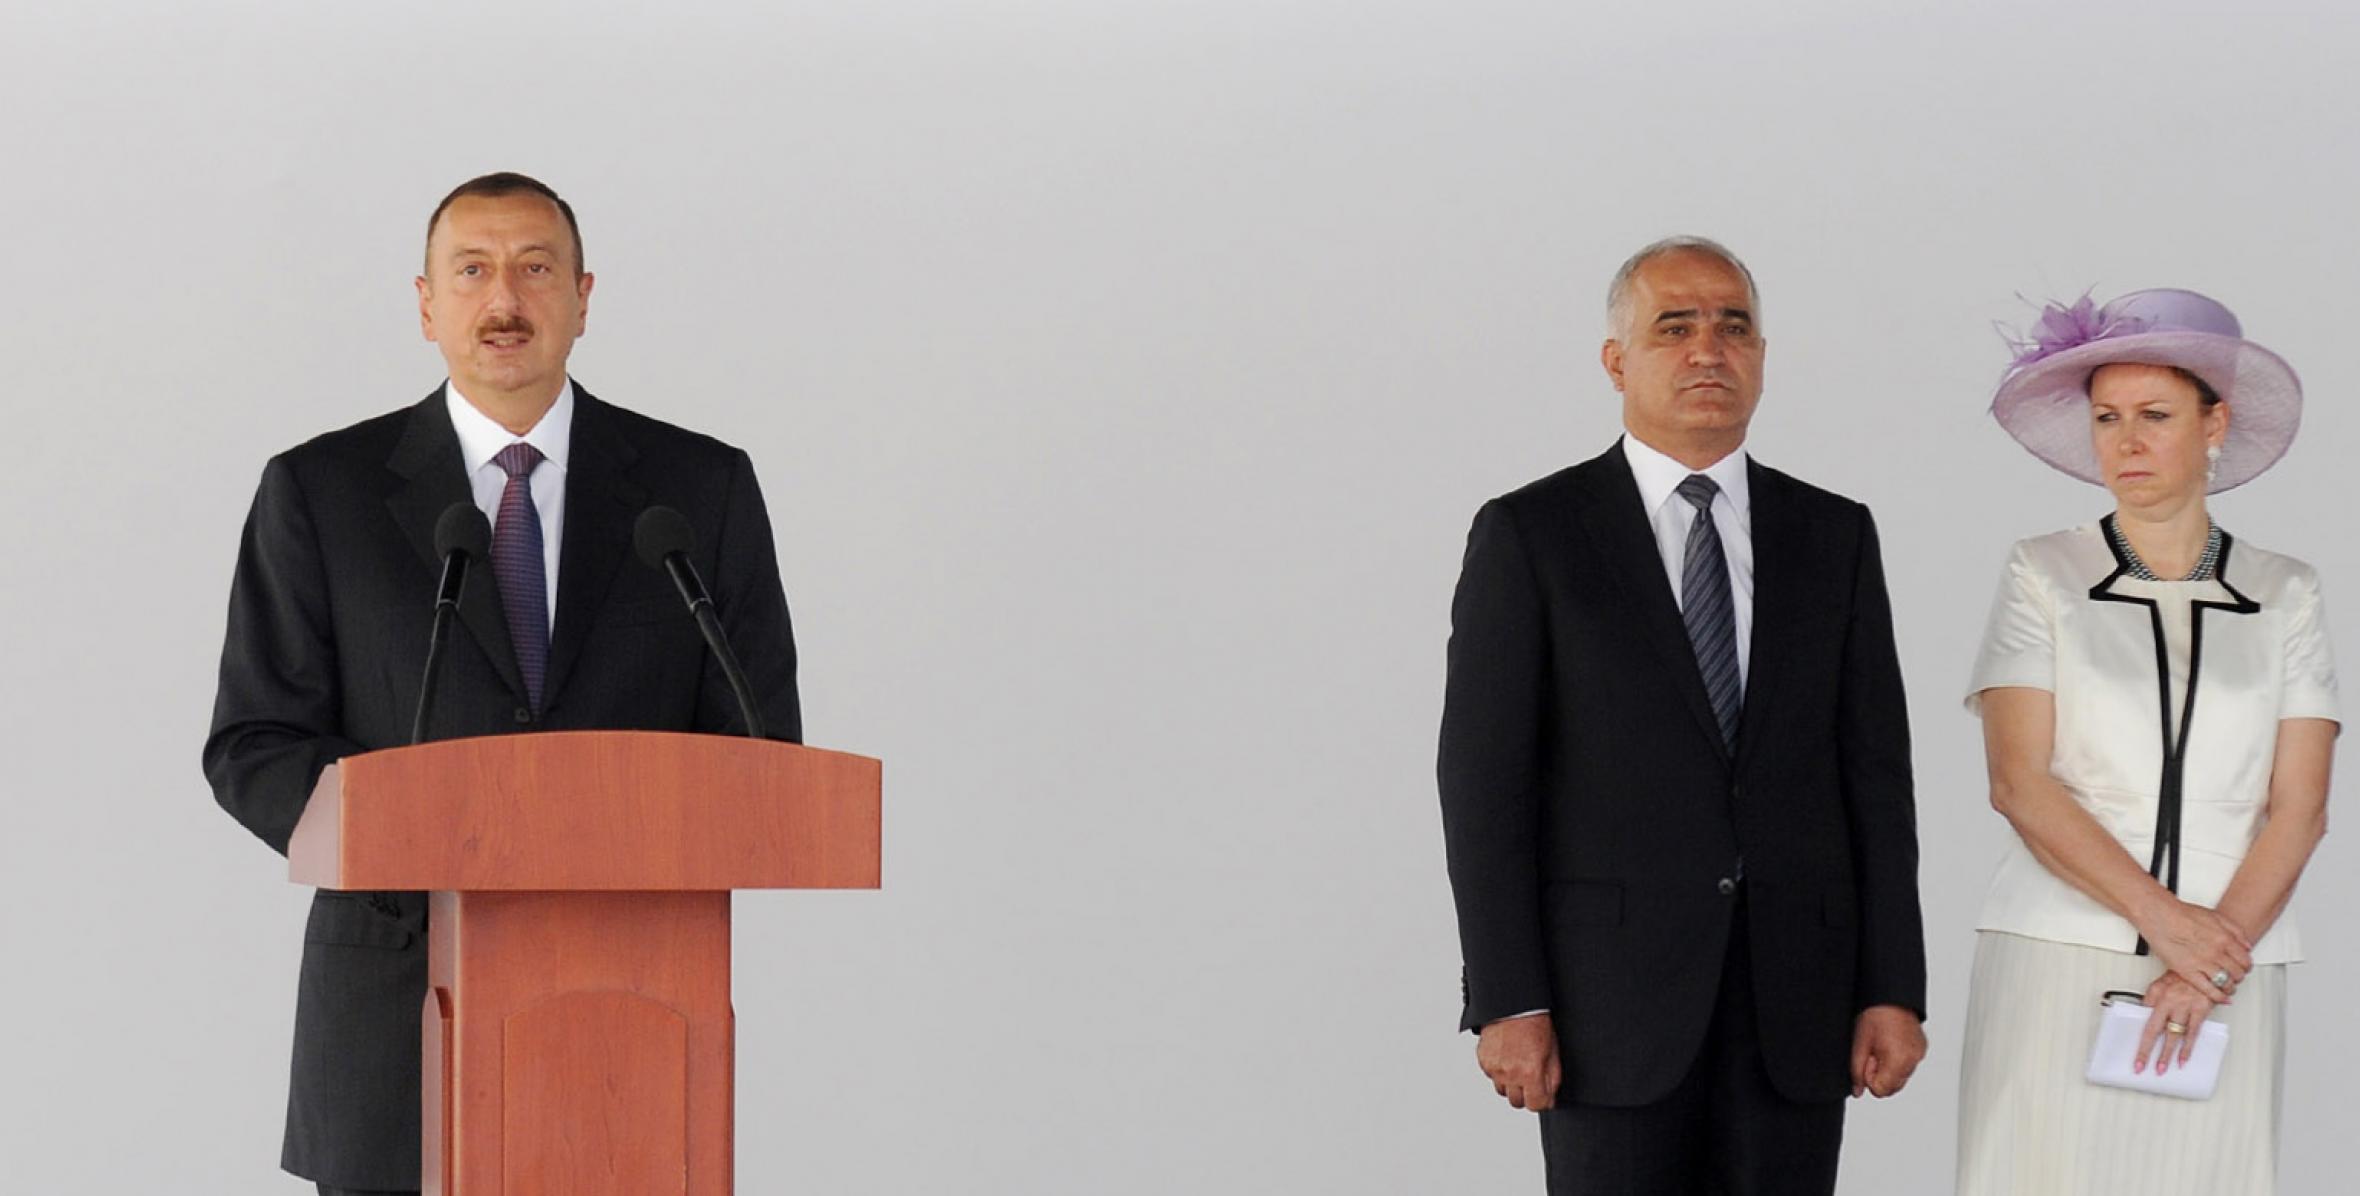 Speech by Ilham Aliyev at the opening of a new cement plant of the “Holcim-Azerbaijan” OJSC in the Garadagh district